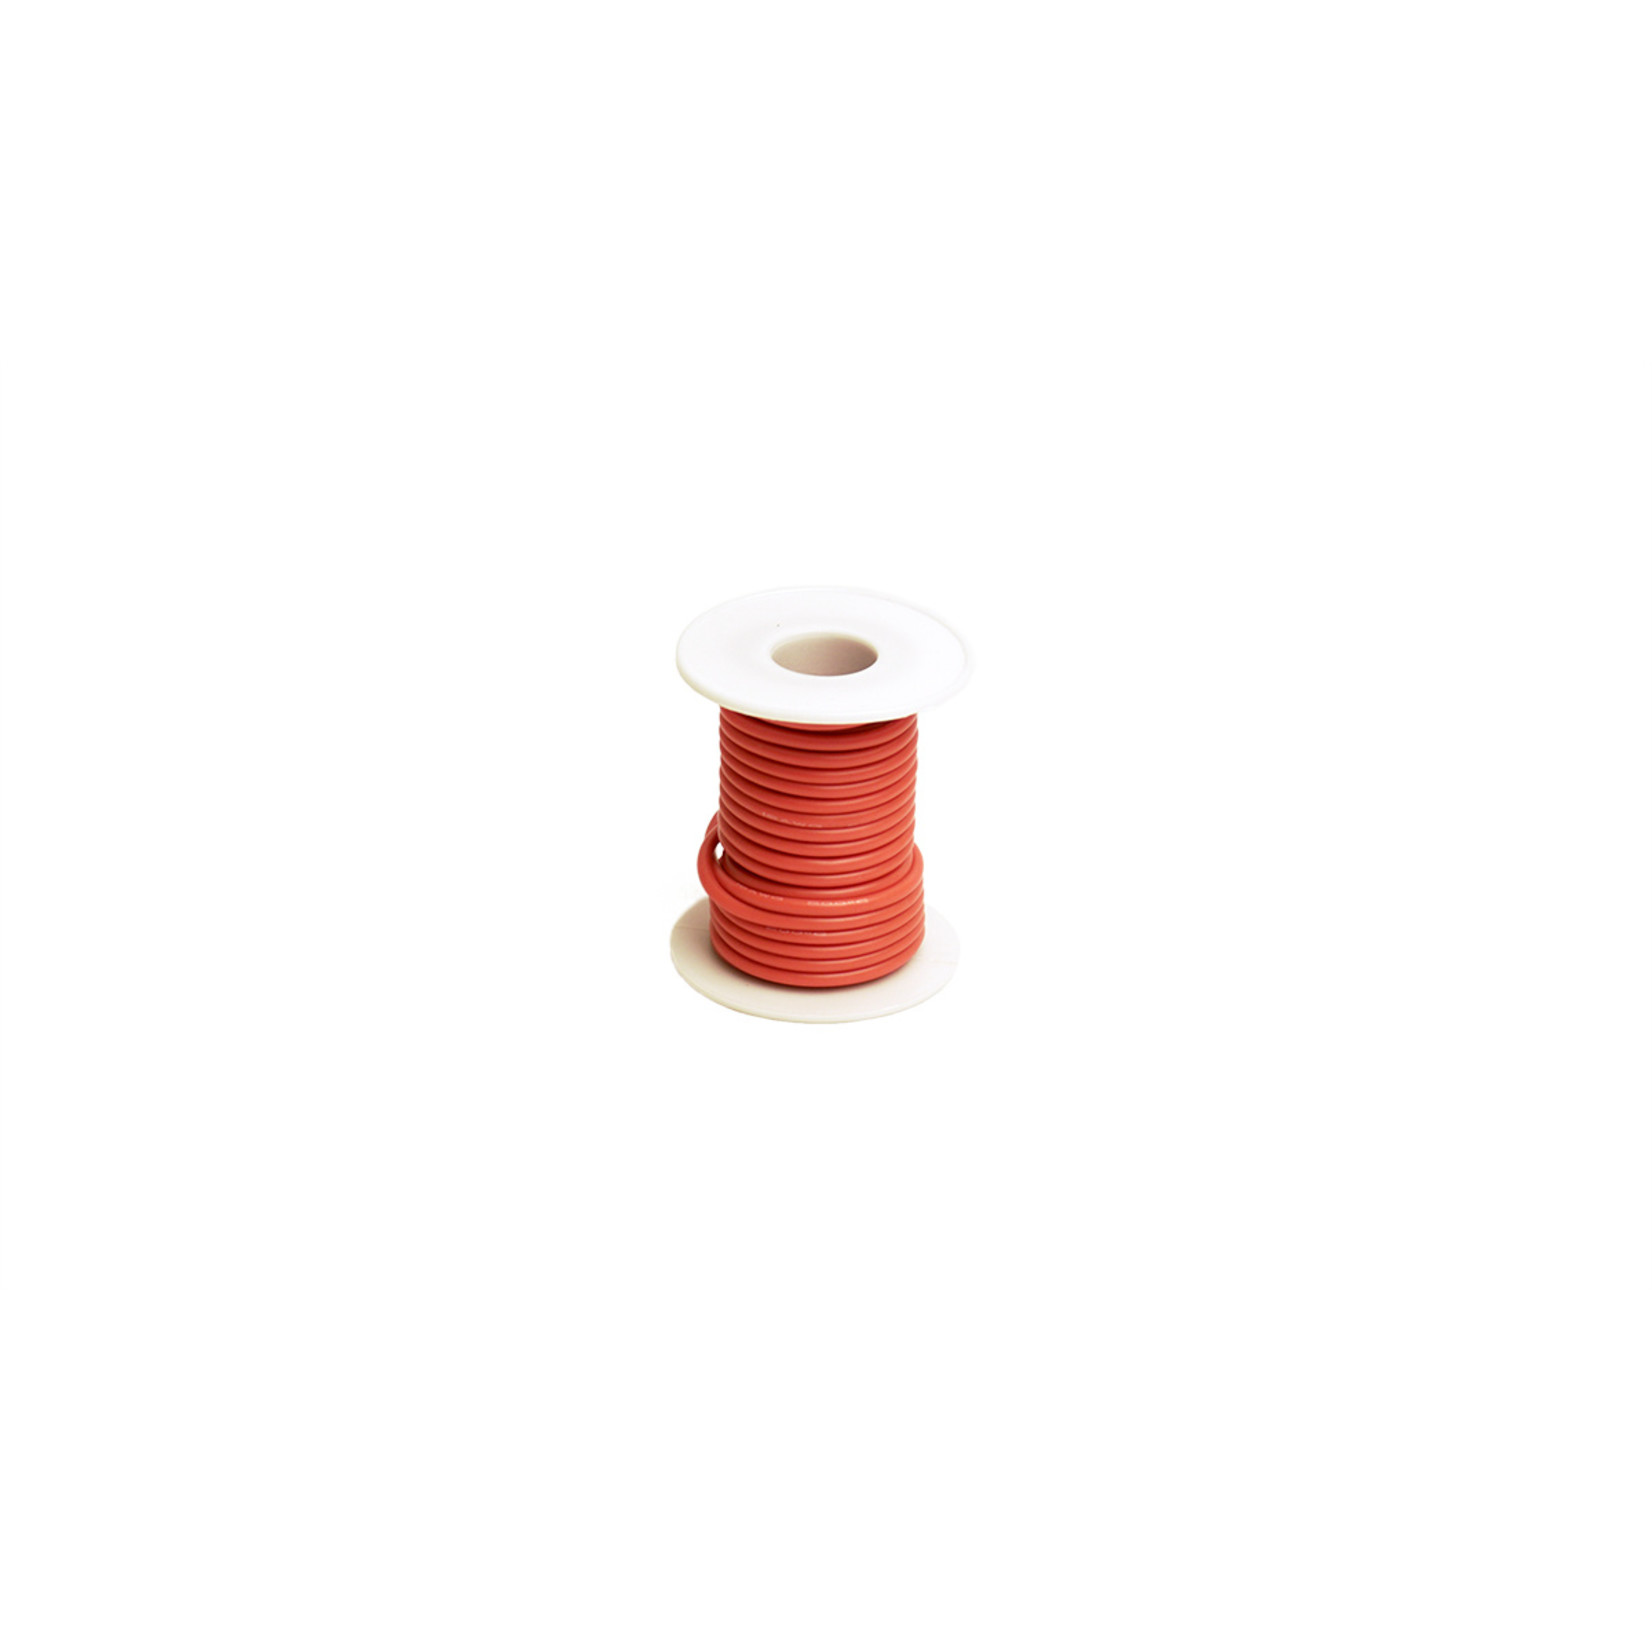 Racers Edge RCE1200 - 16 Gauge Silicone Ultra-Flex Wire; 25' Spool (Red)